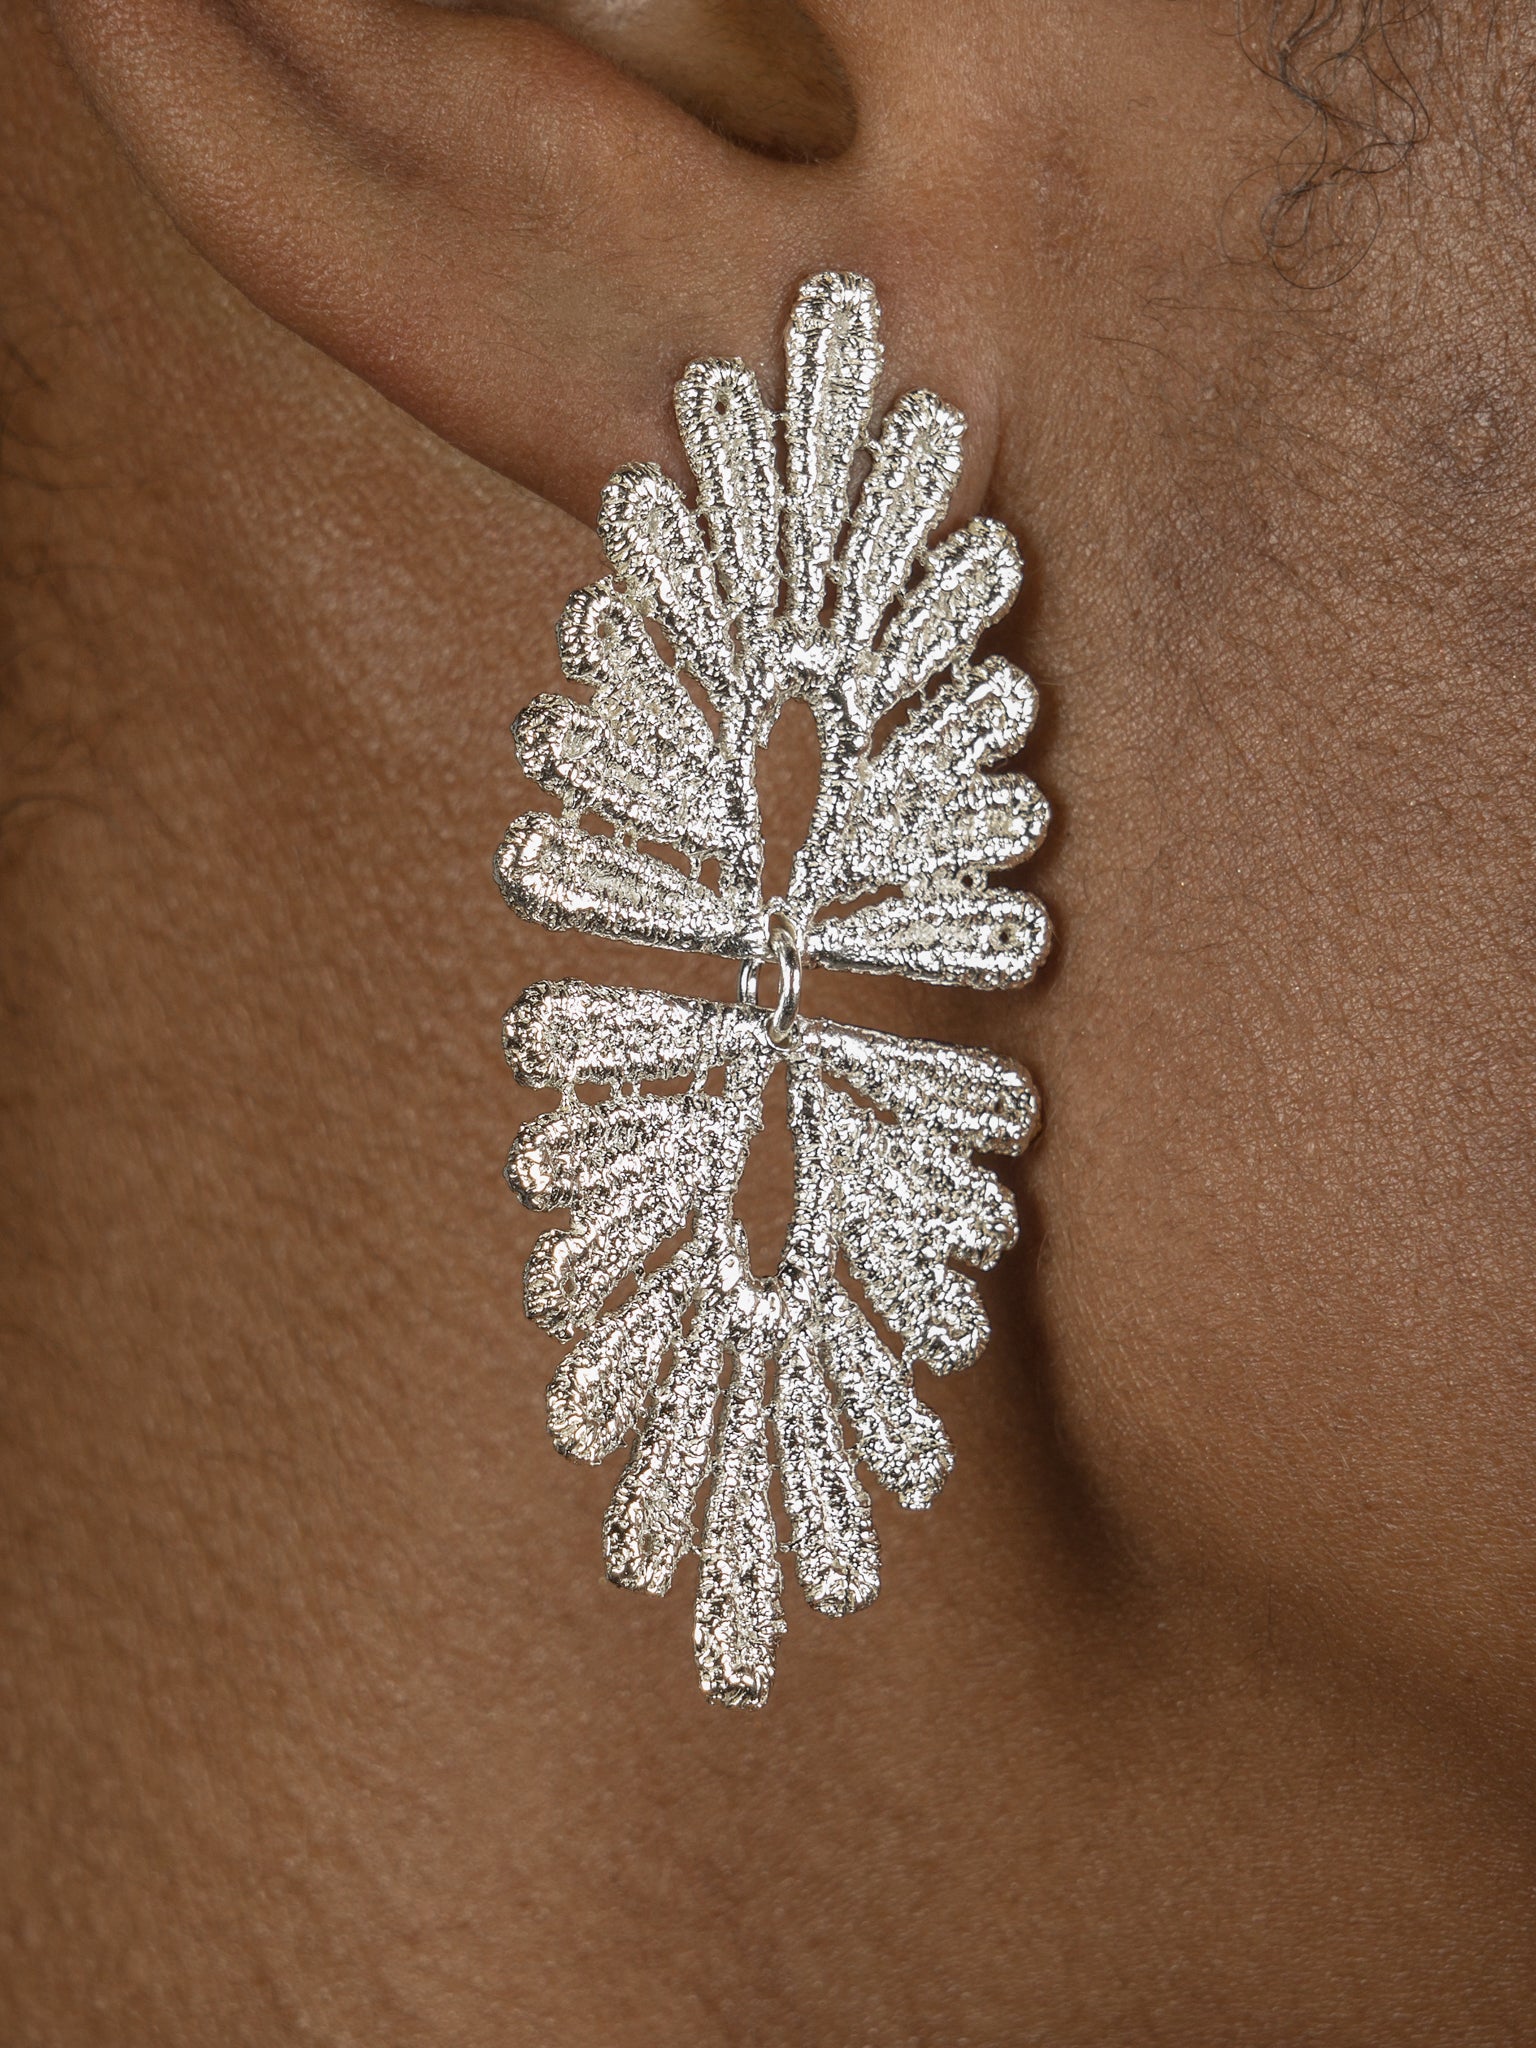 A close up of a woman's ear adorned with a pair of vintage-inspired silver Cremilde Bispo Jewellery Guipure Earrings, showcasing delicate lace artistry.